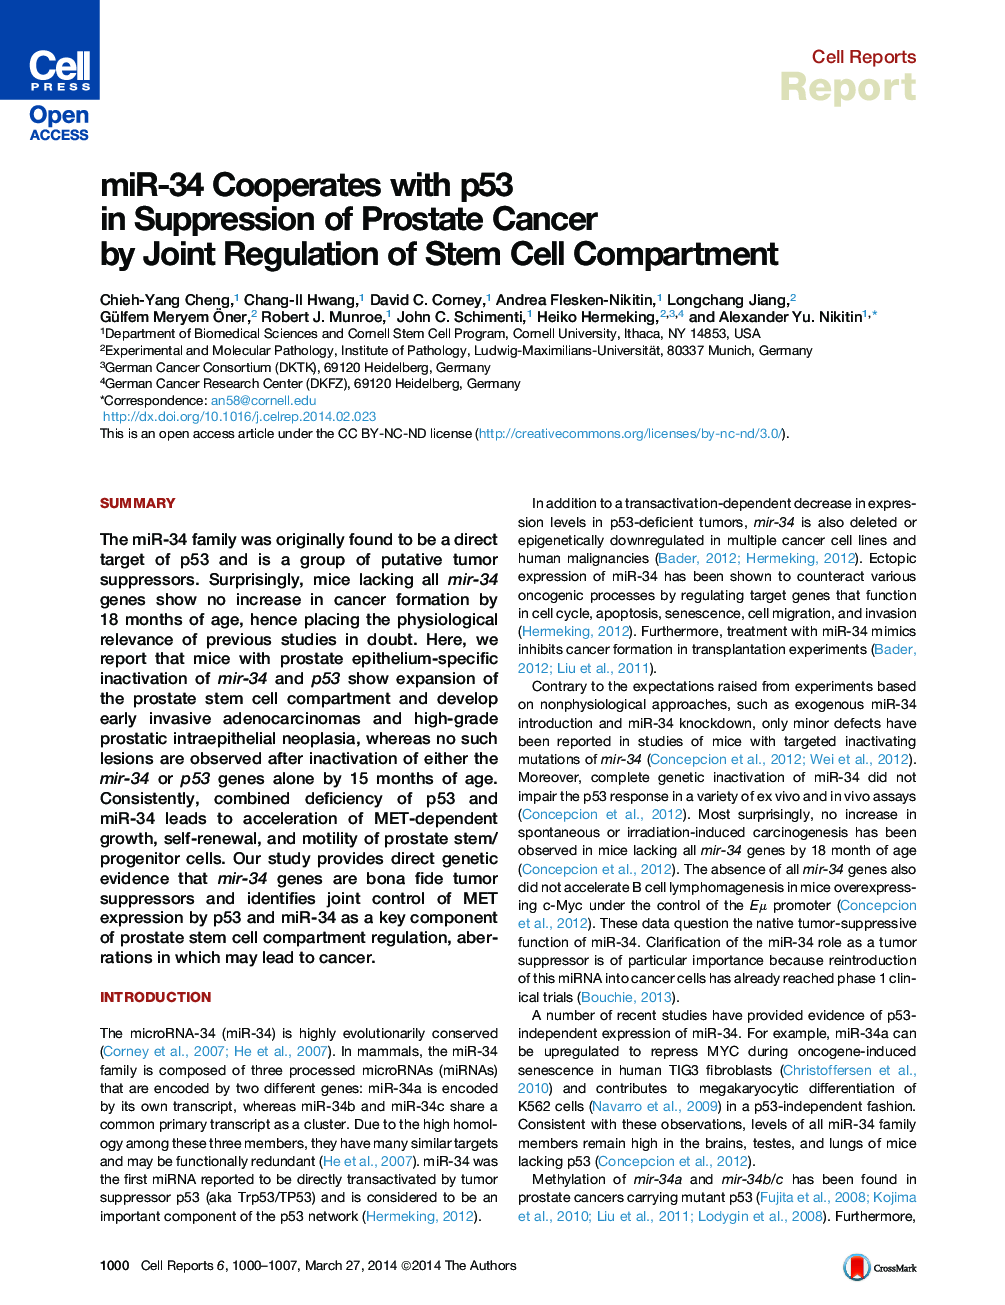 miR-34 Cooperates with p53 in Suppression of Prostate Cancer by Joint Regulation of Stem Cell Compartment 